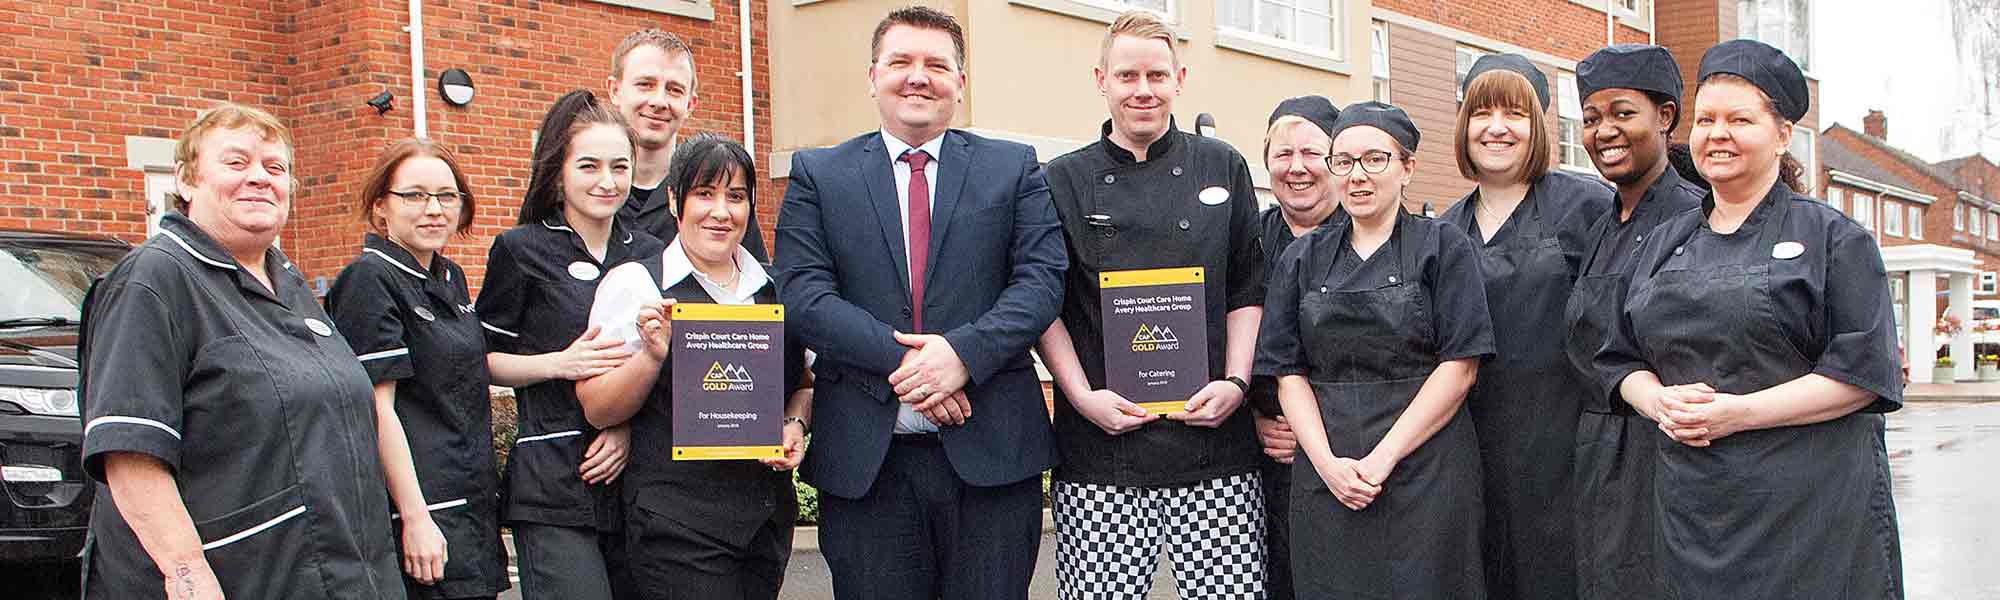 Crispin Court Care Home CAP Awards Gold Catering Housekeeping staff photo celebrate